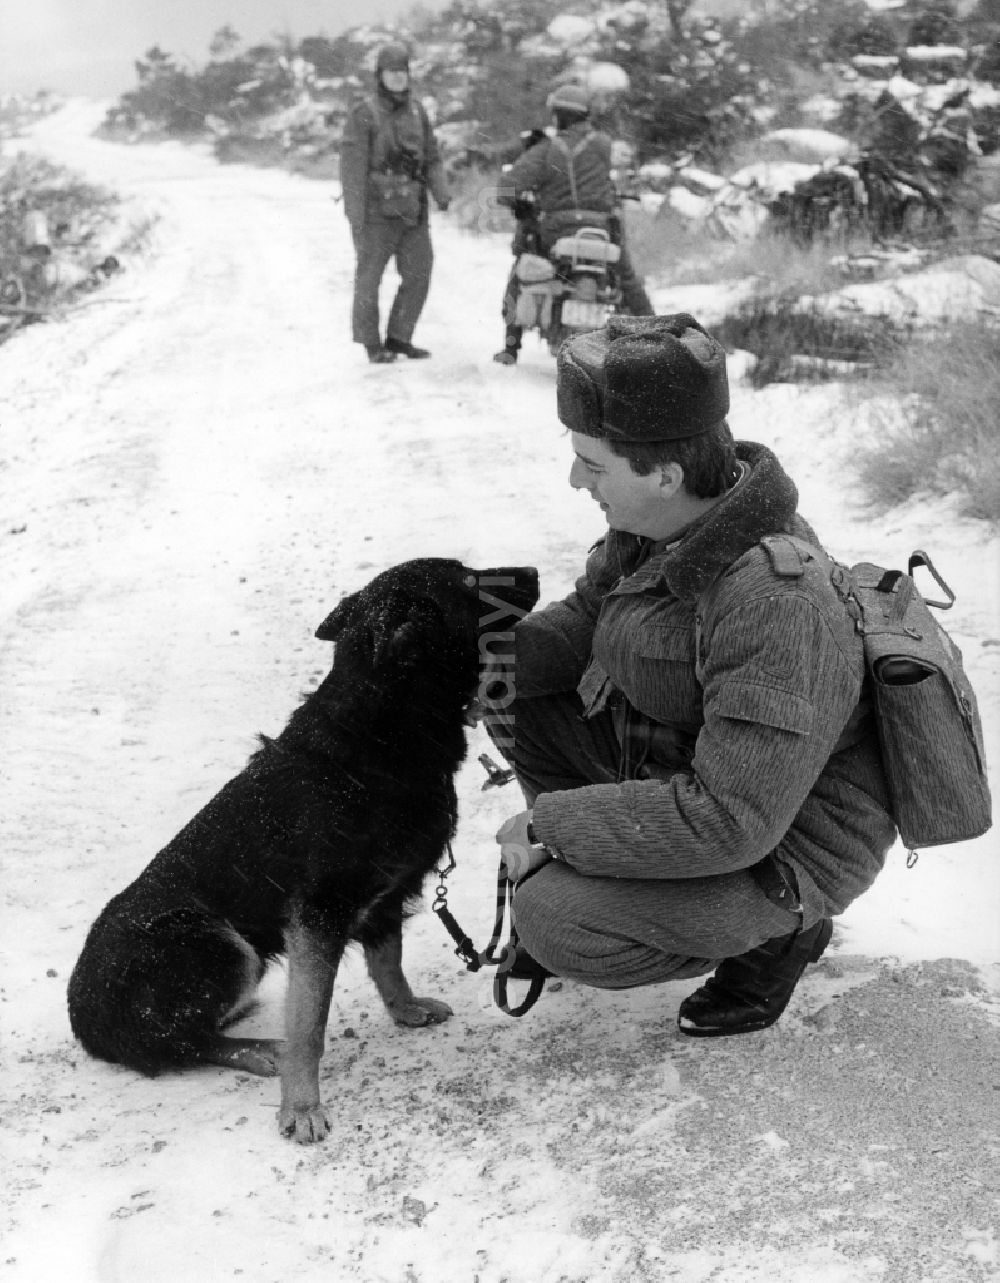 GDR image archive: Abbenrode - Border Patrol with dog near Abbenrode in today's federal state of Saxony-Anhalt